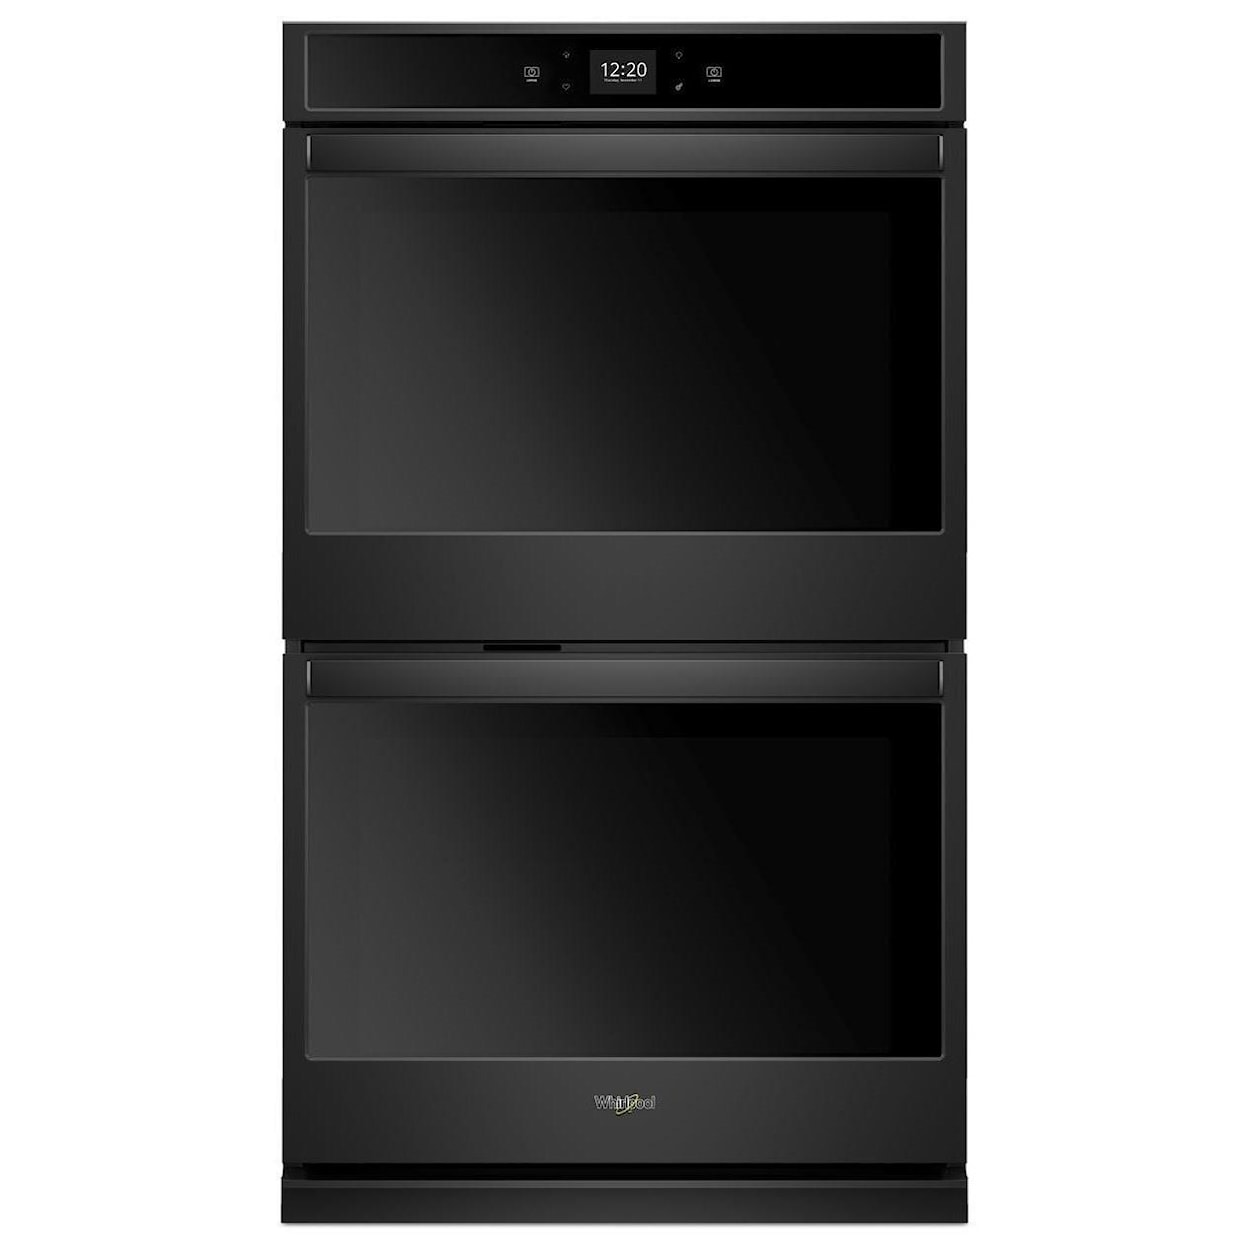 Whirlpool Electric Wall Ovens - Whirlpool 10.0 cu. ft. Smart Double Wall Oven